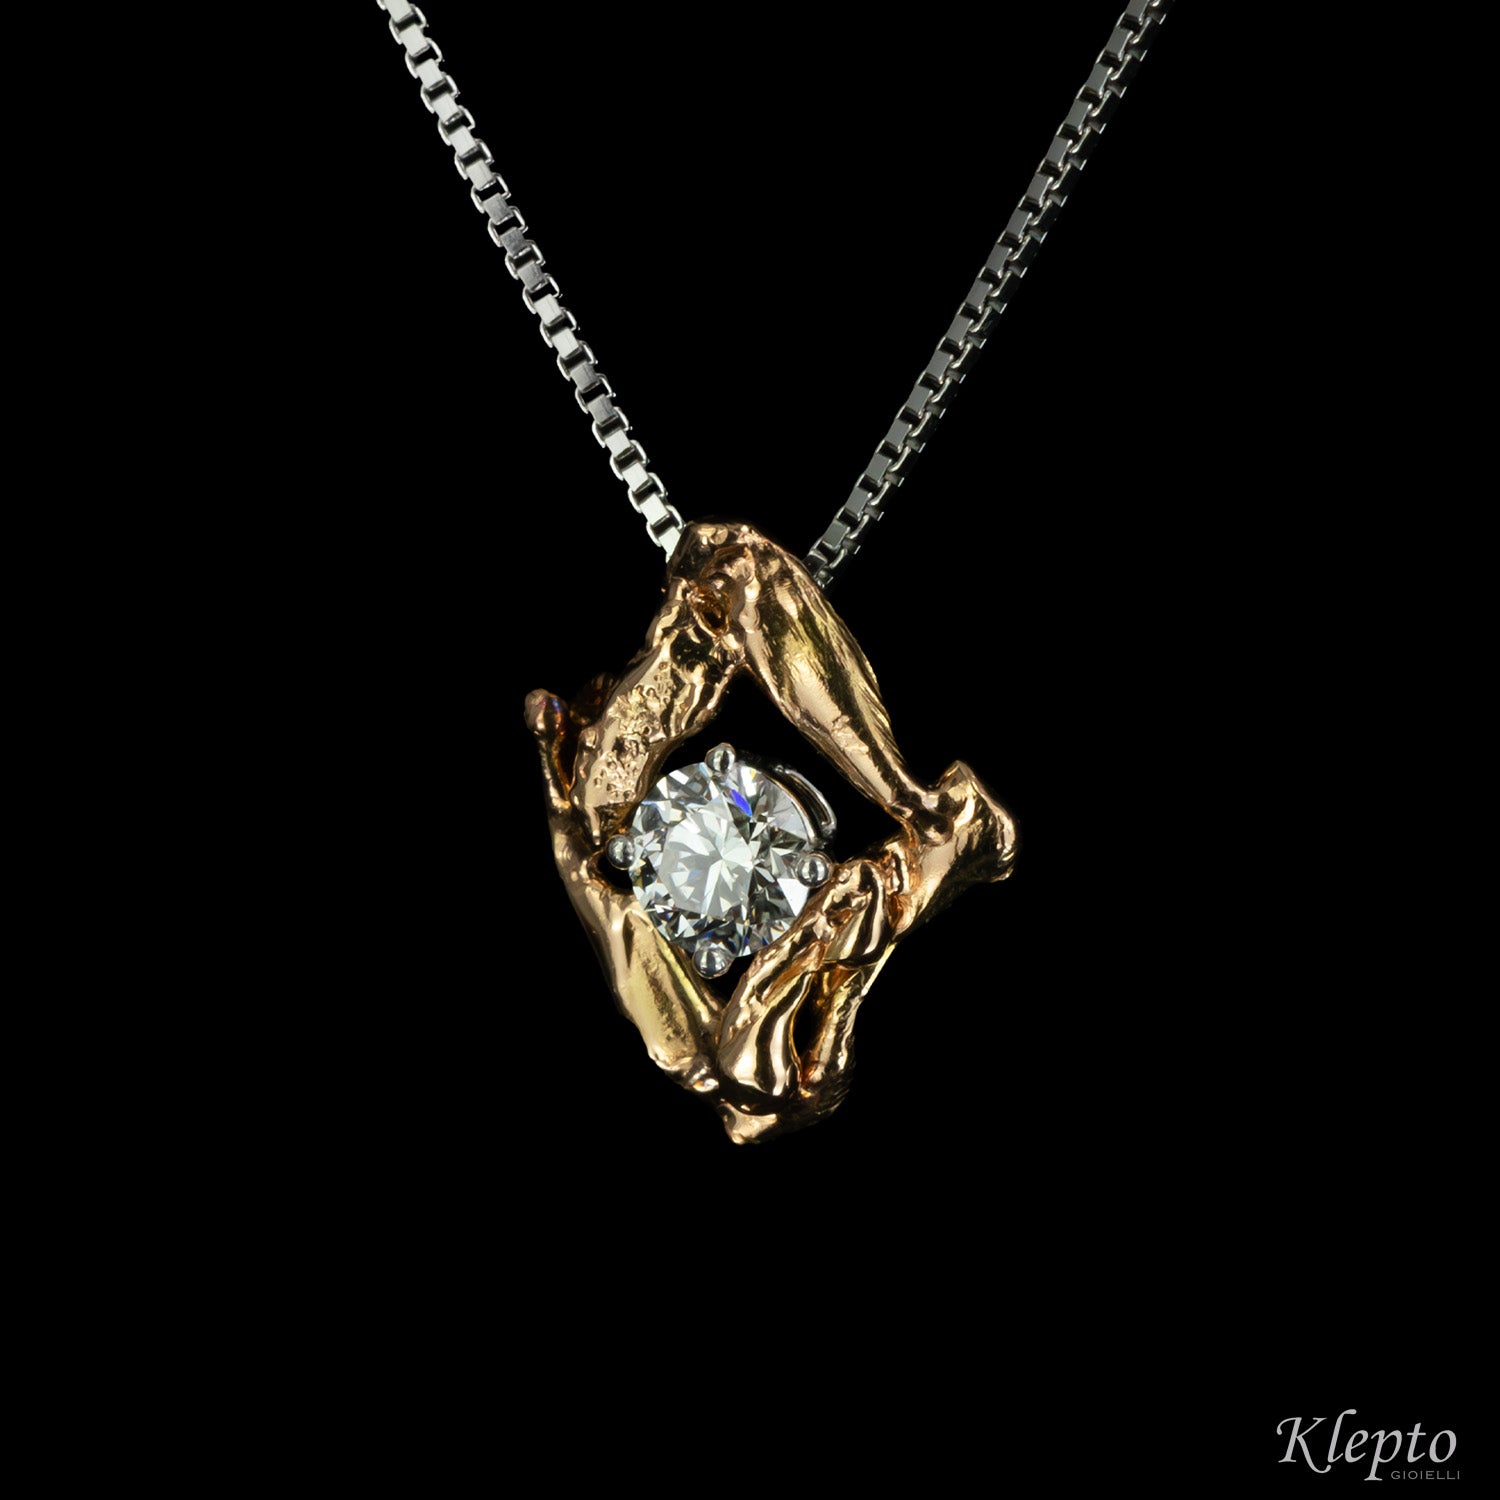 Pepita pendant in white and rose gold